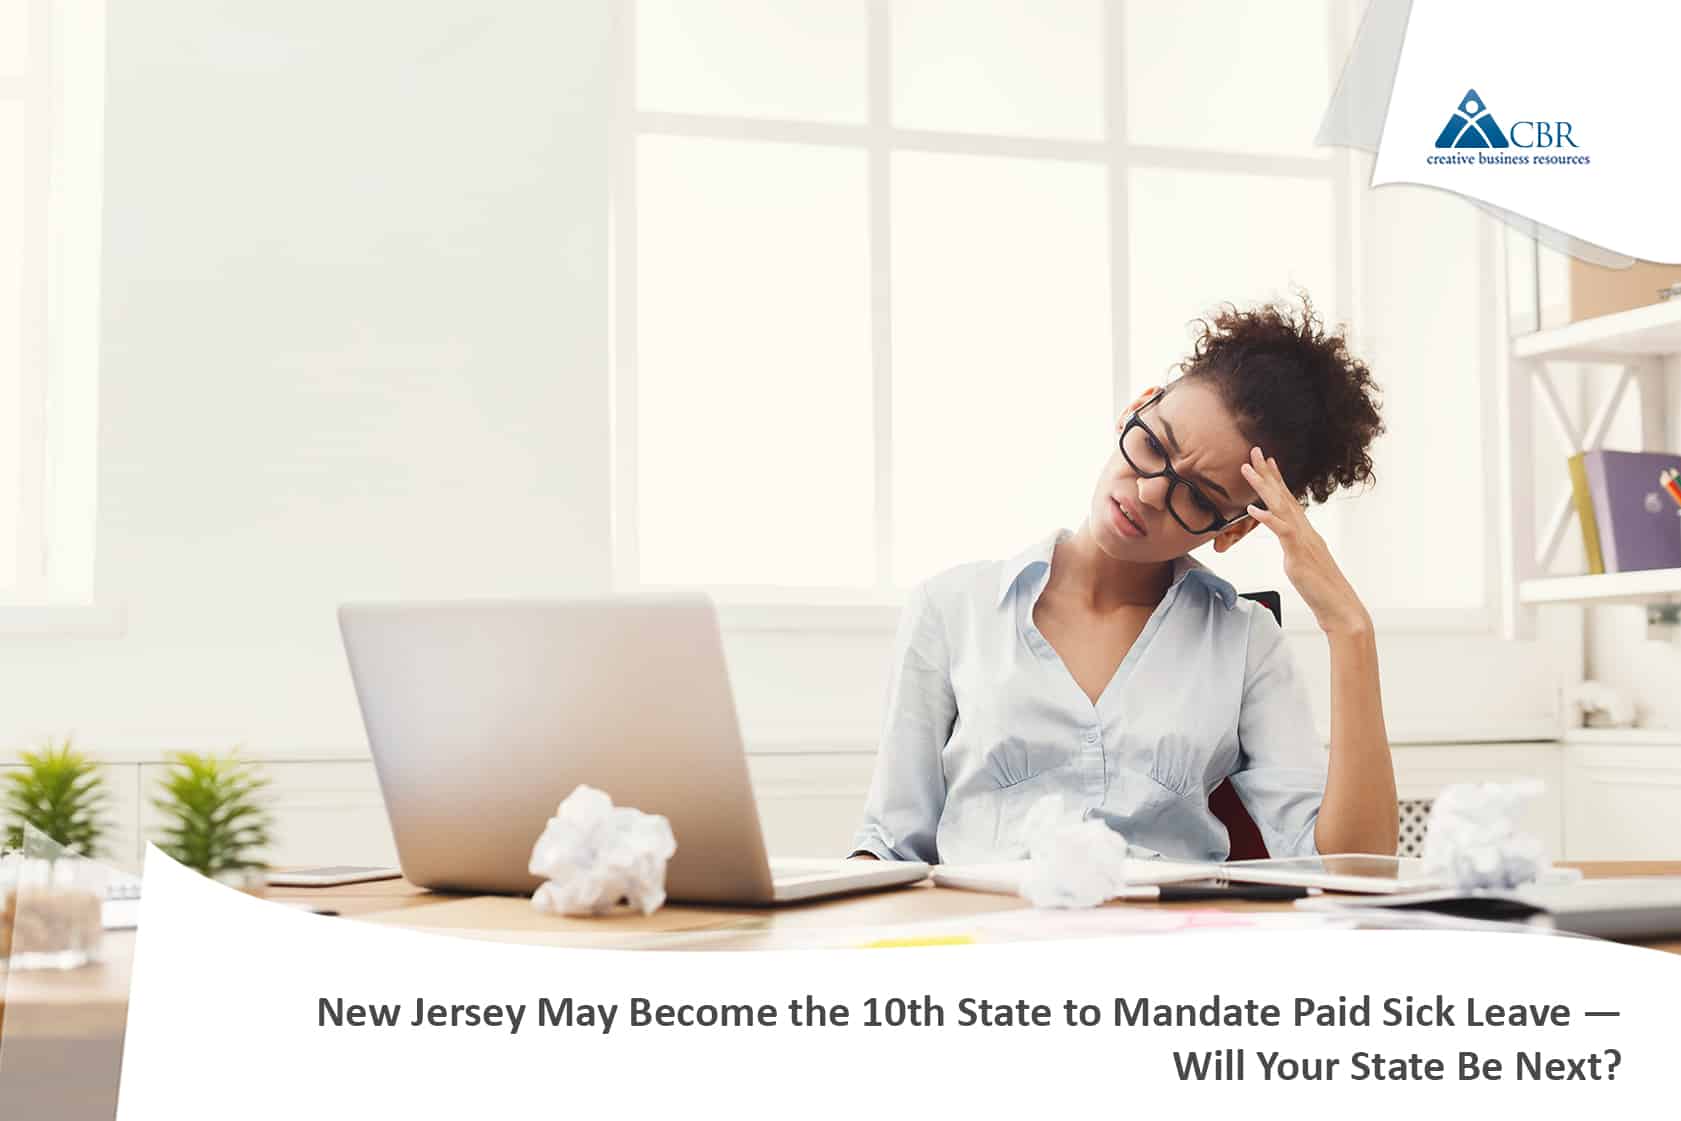 New Jersey May Become the 10th State to Mandate Paid Sick Leave